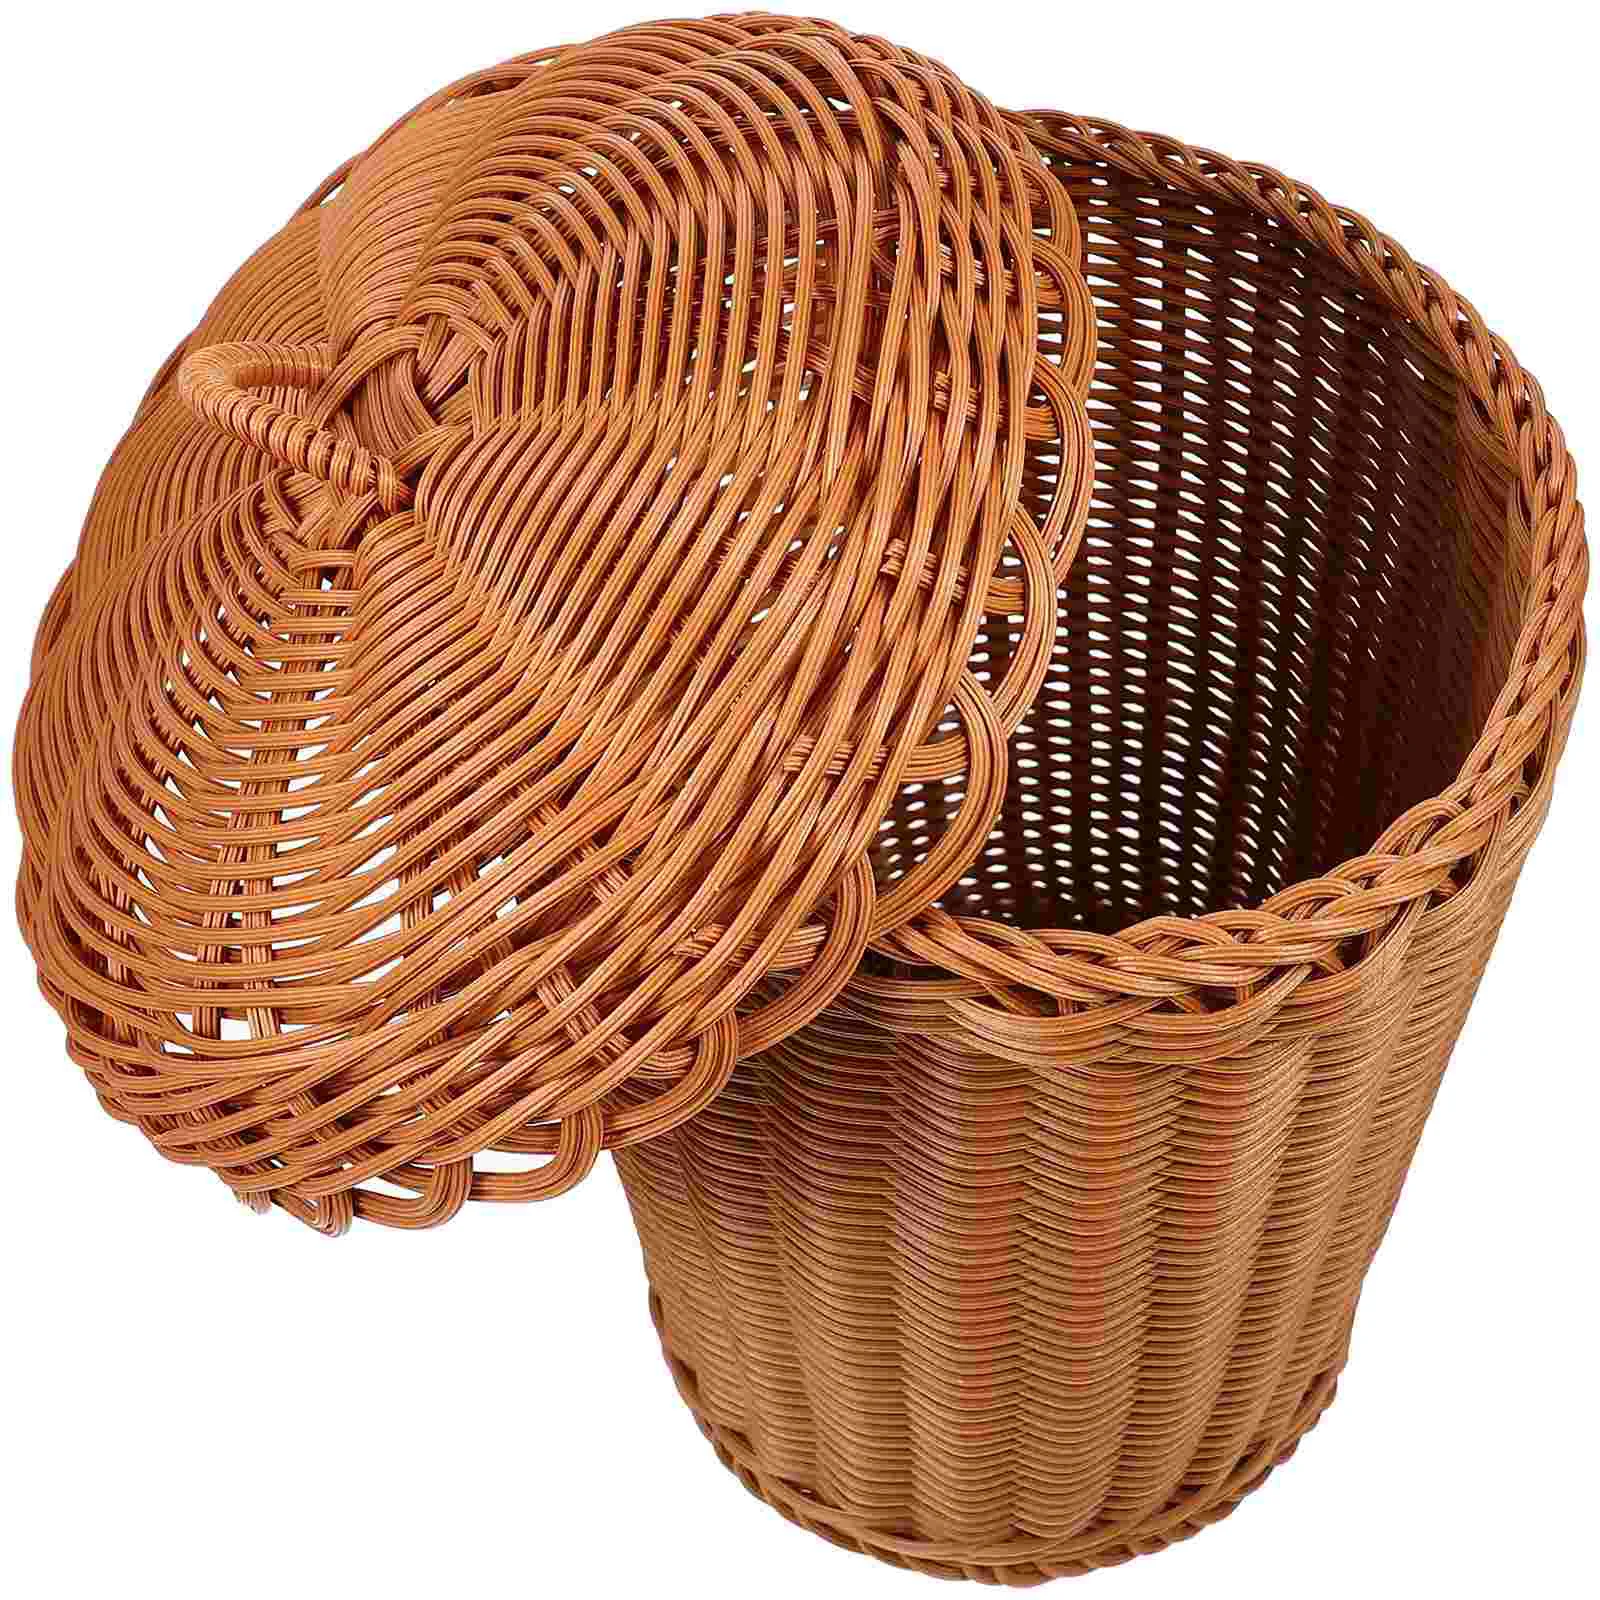 

Woven Trash Can Baskets Lids Decorative Storage Handmade Living Room Imitation Rattan Weaving Sundries Office Garbage collector